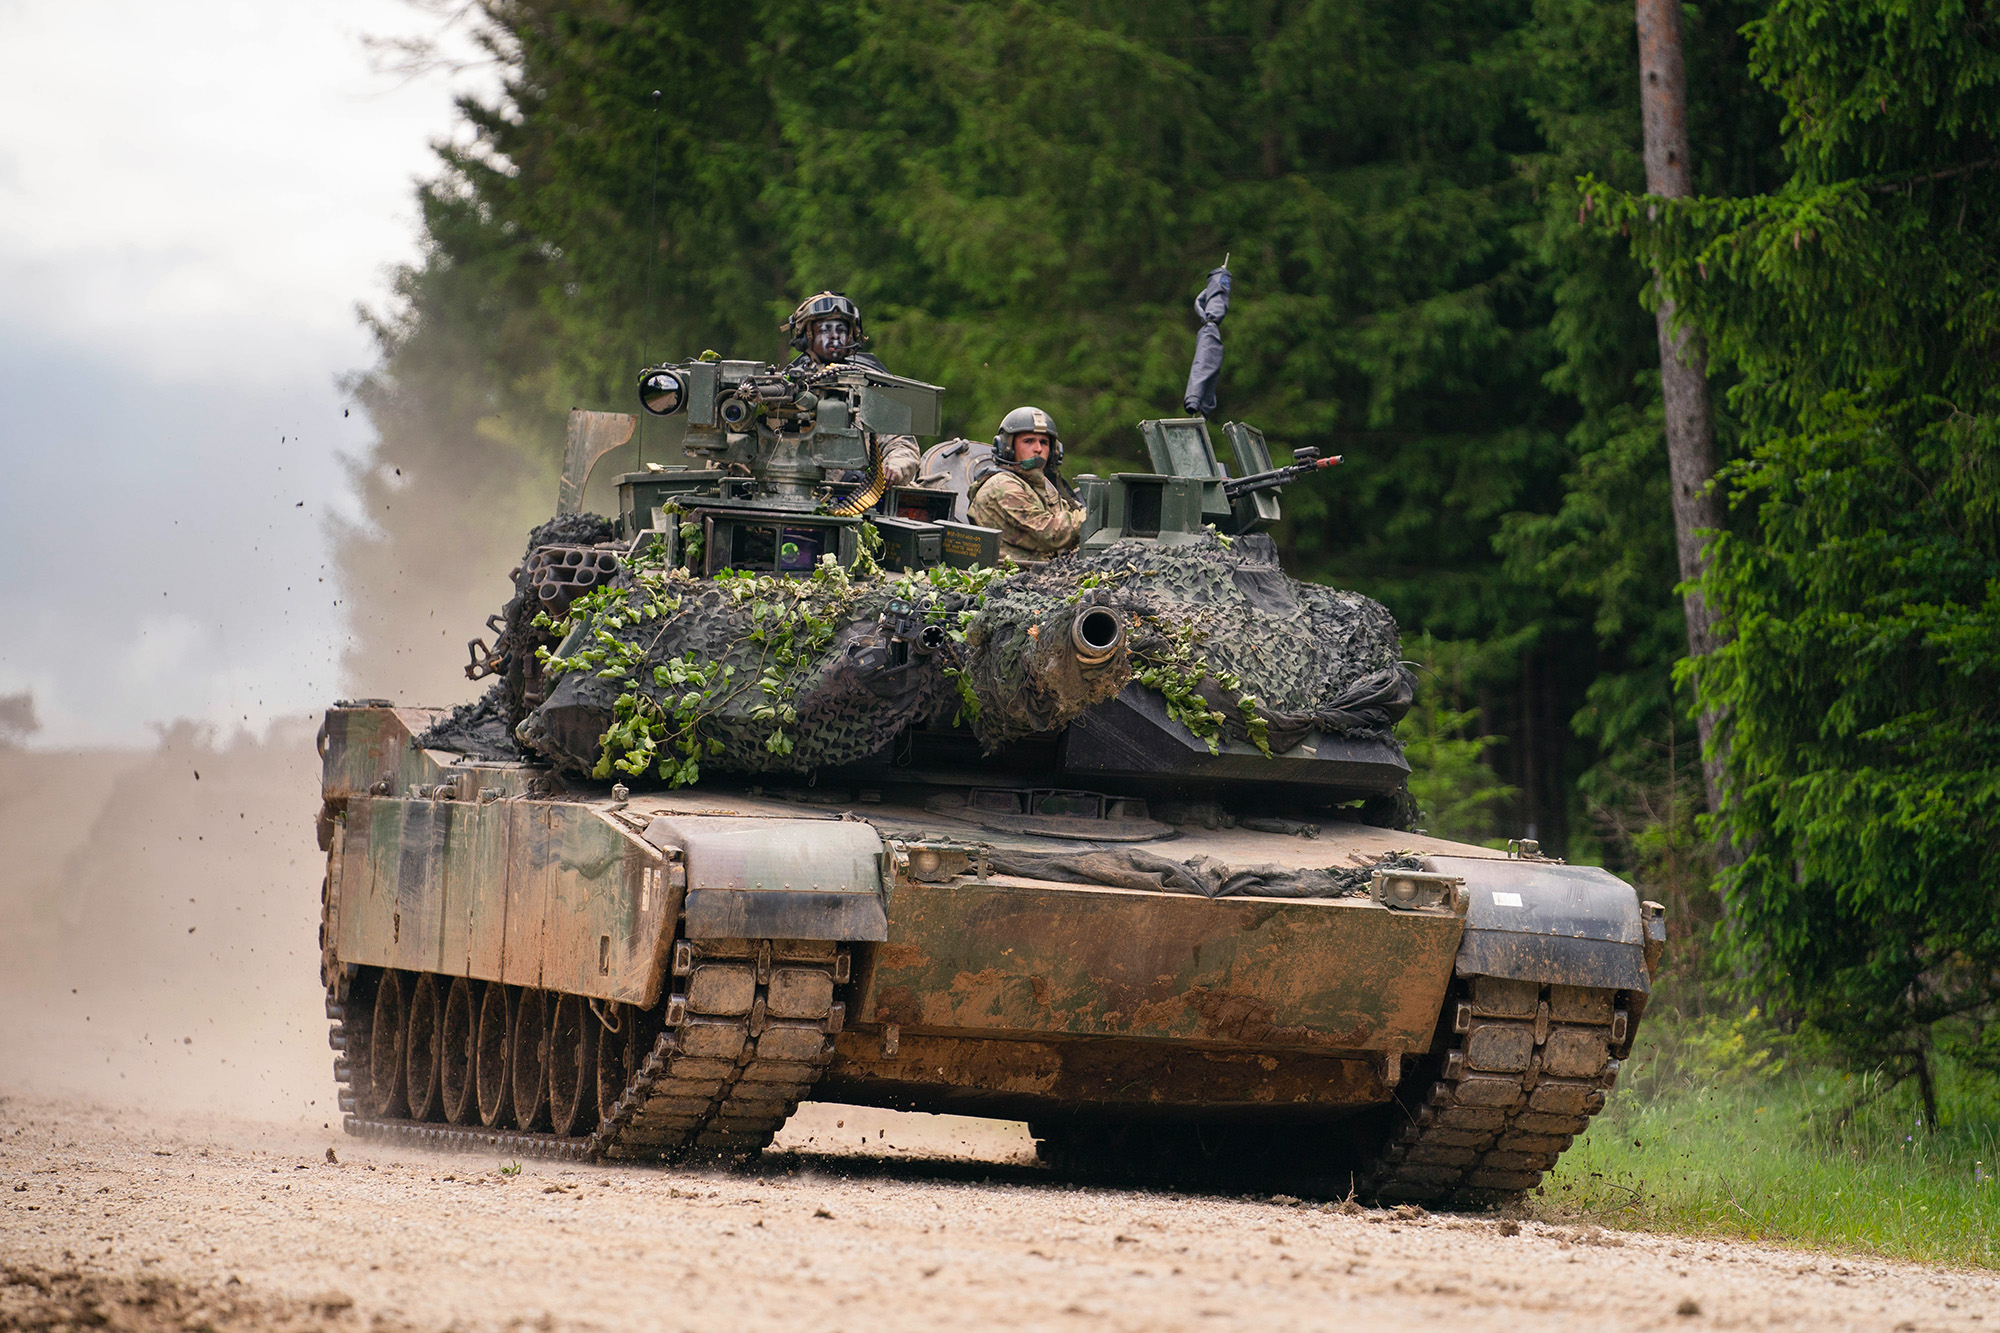 A US Army M1 Abrams tank drives across a road during a multinational exercise at the Hohenfels training area in Bavaria, Germany, on June 8.